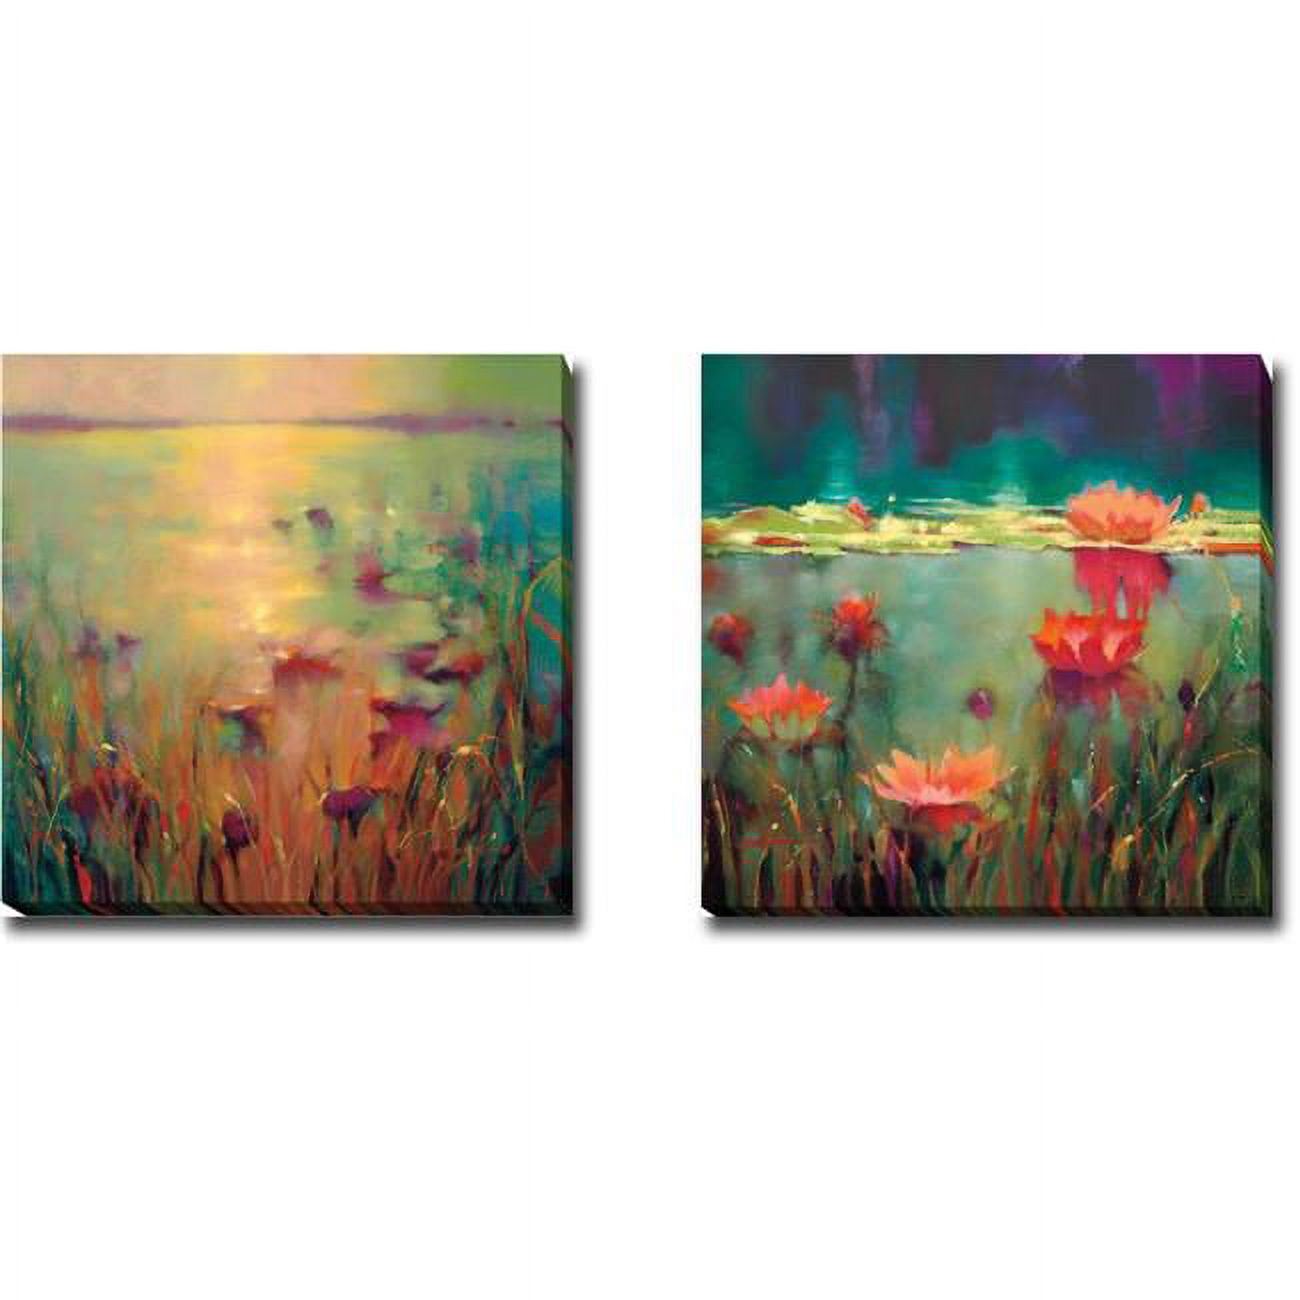 3636380cg Morning & Nightfall By Donna Young 2-piece Premium Oversize Gallery-wrapped Canvas Giclee Art Set - 36 X 36 X 1.5 In.